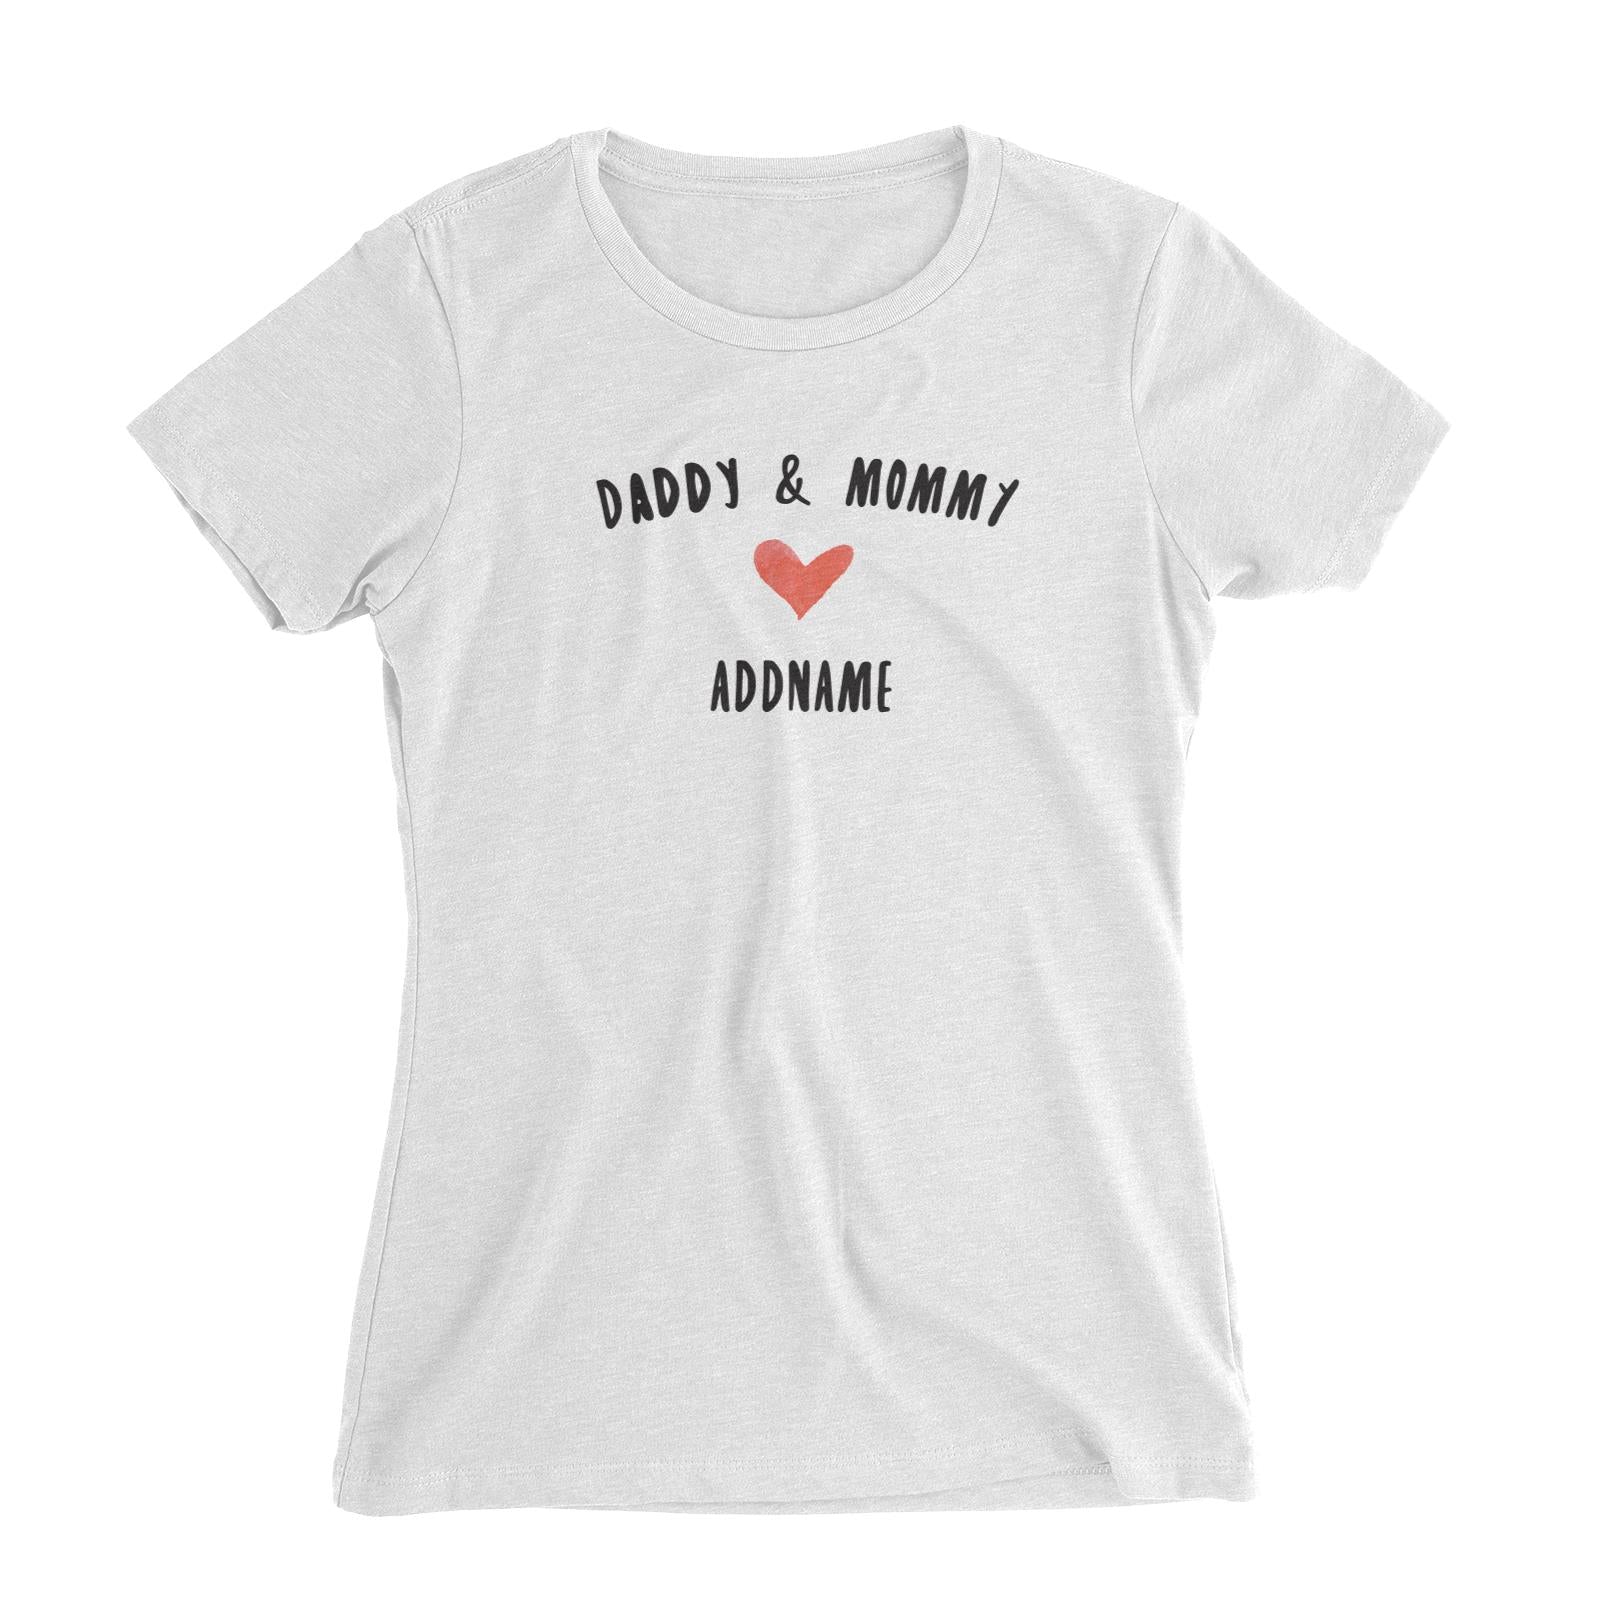 Daddy & Mommy Love Addname Women's Slim Fit T-Shirt  Matching Family Personalizable Designs